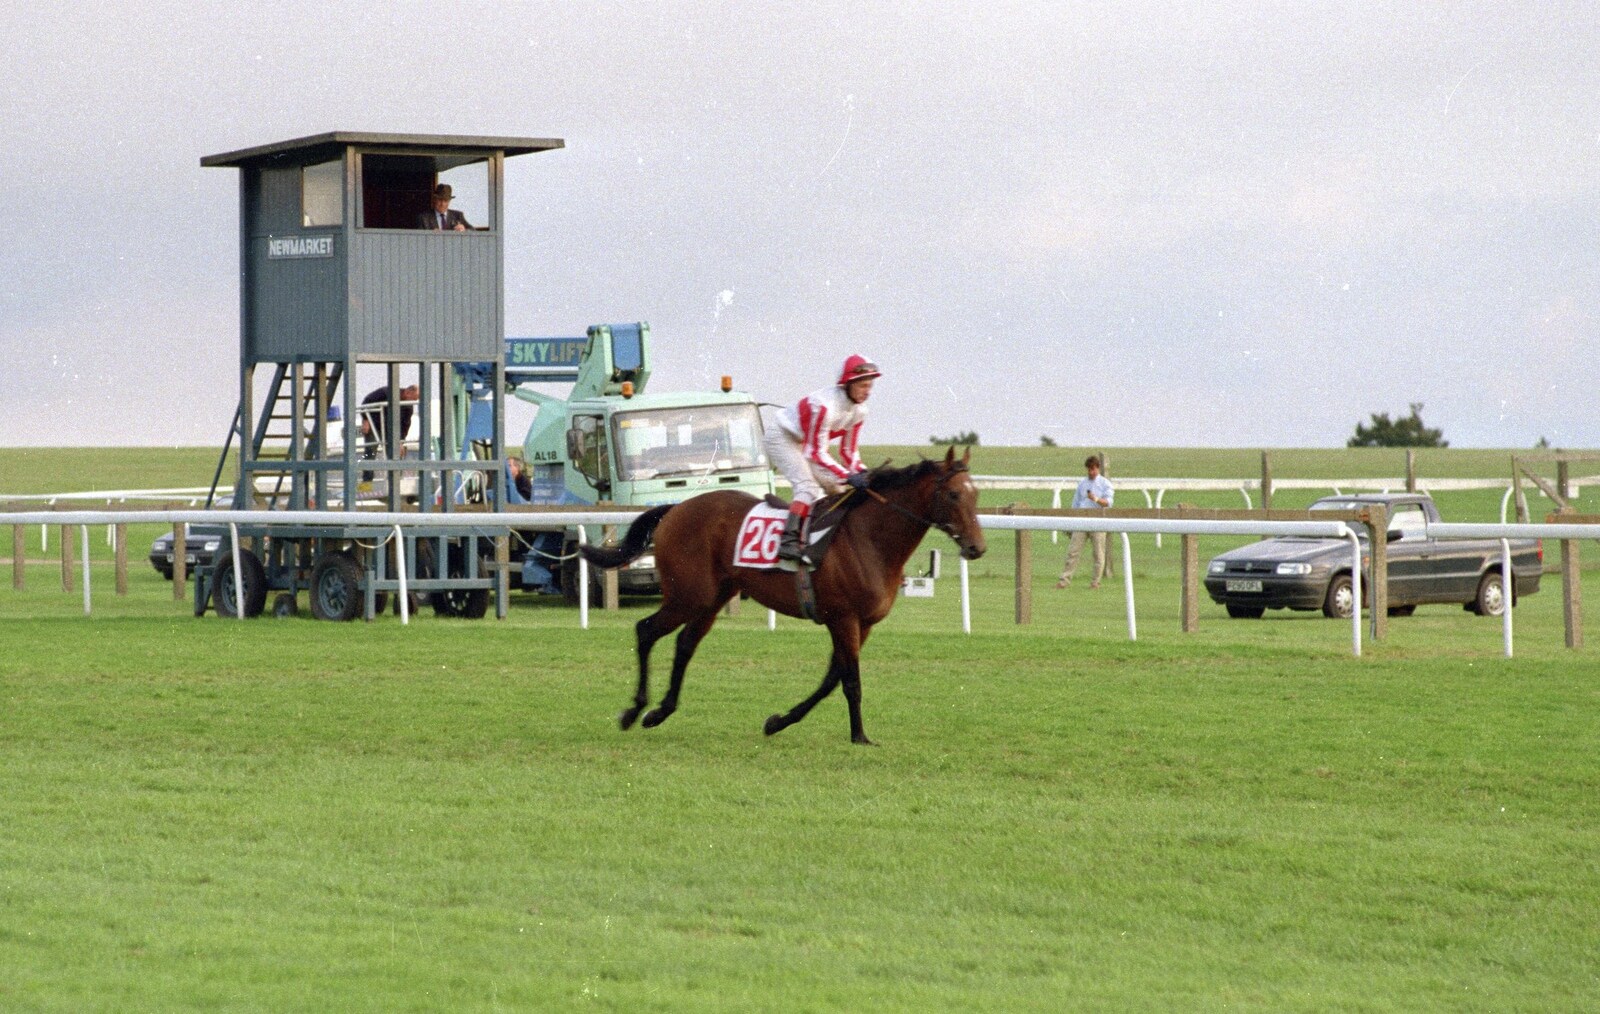 Horse 26 trots past the starter's box from 3G Lab Goes to the Races, Newmarket, Suffolk - 15th July 2001